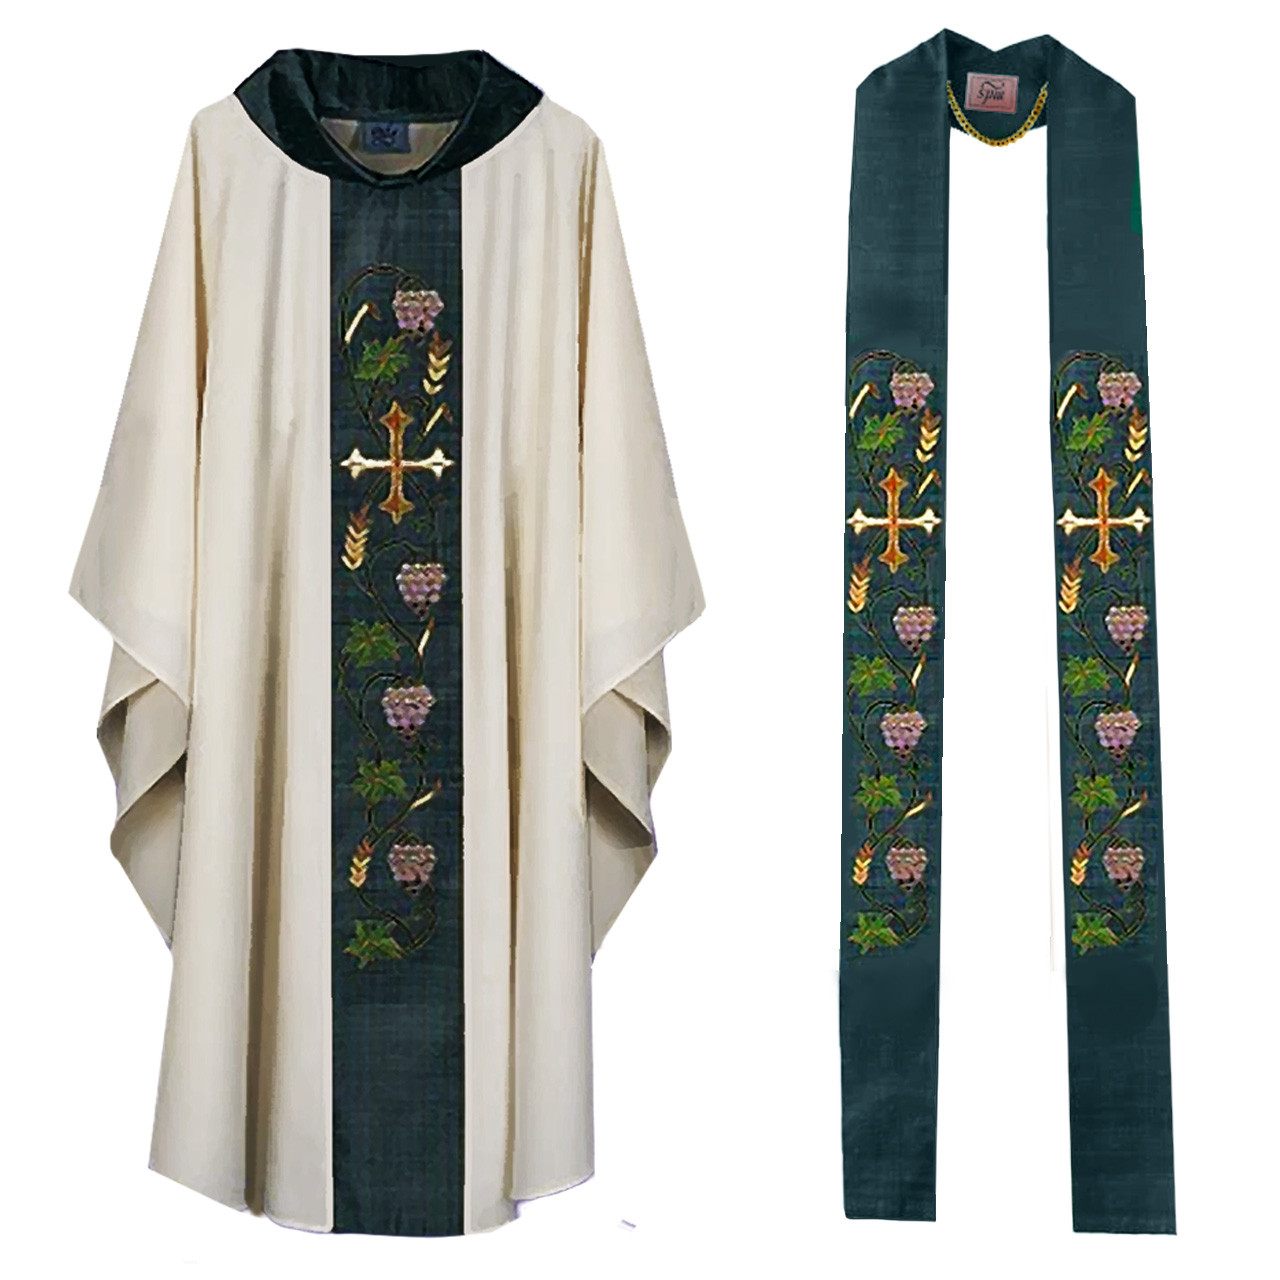 HB135 Funeral Pall with Silk Banding Matching vestments